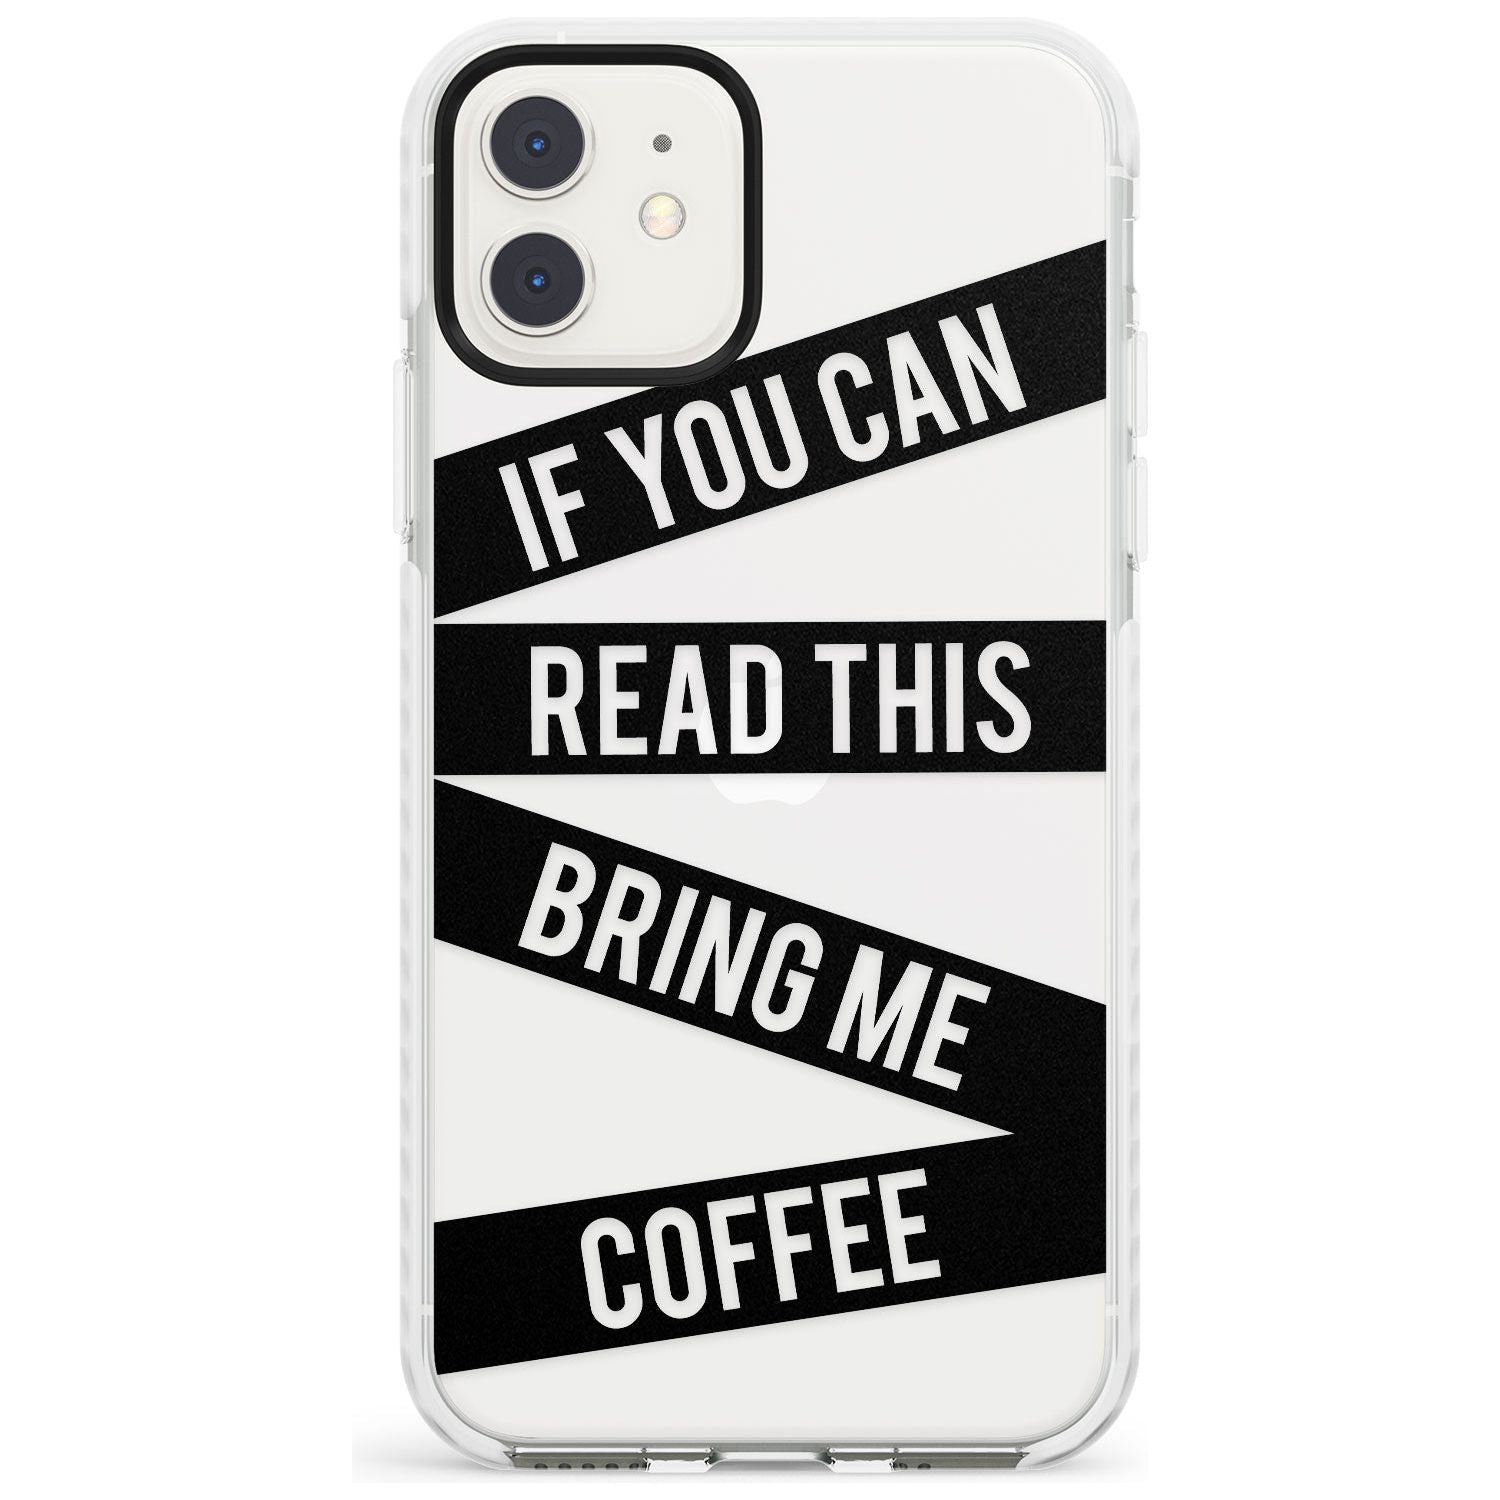 Black Stripes Bring Me Coffee Impact Phone Case for iPhone 11